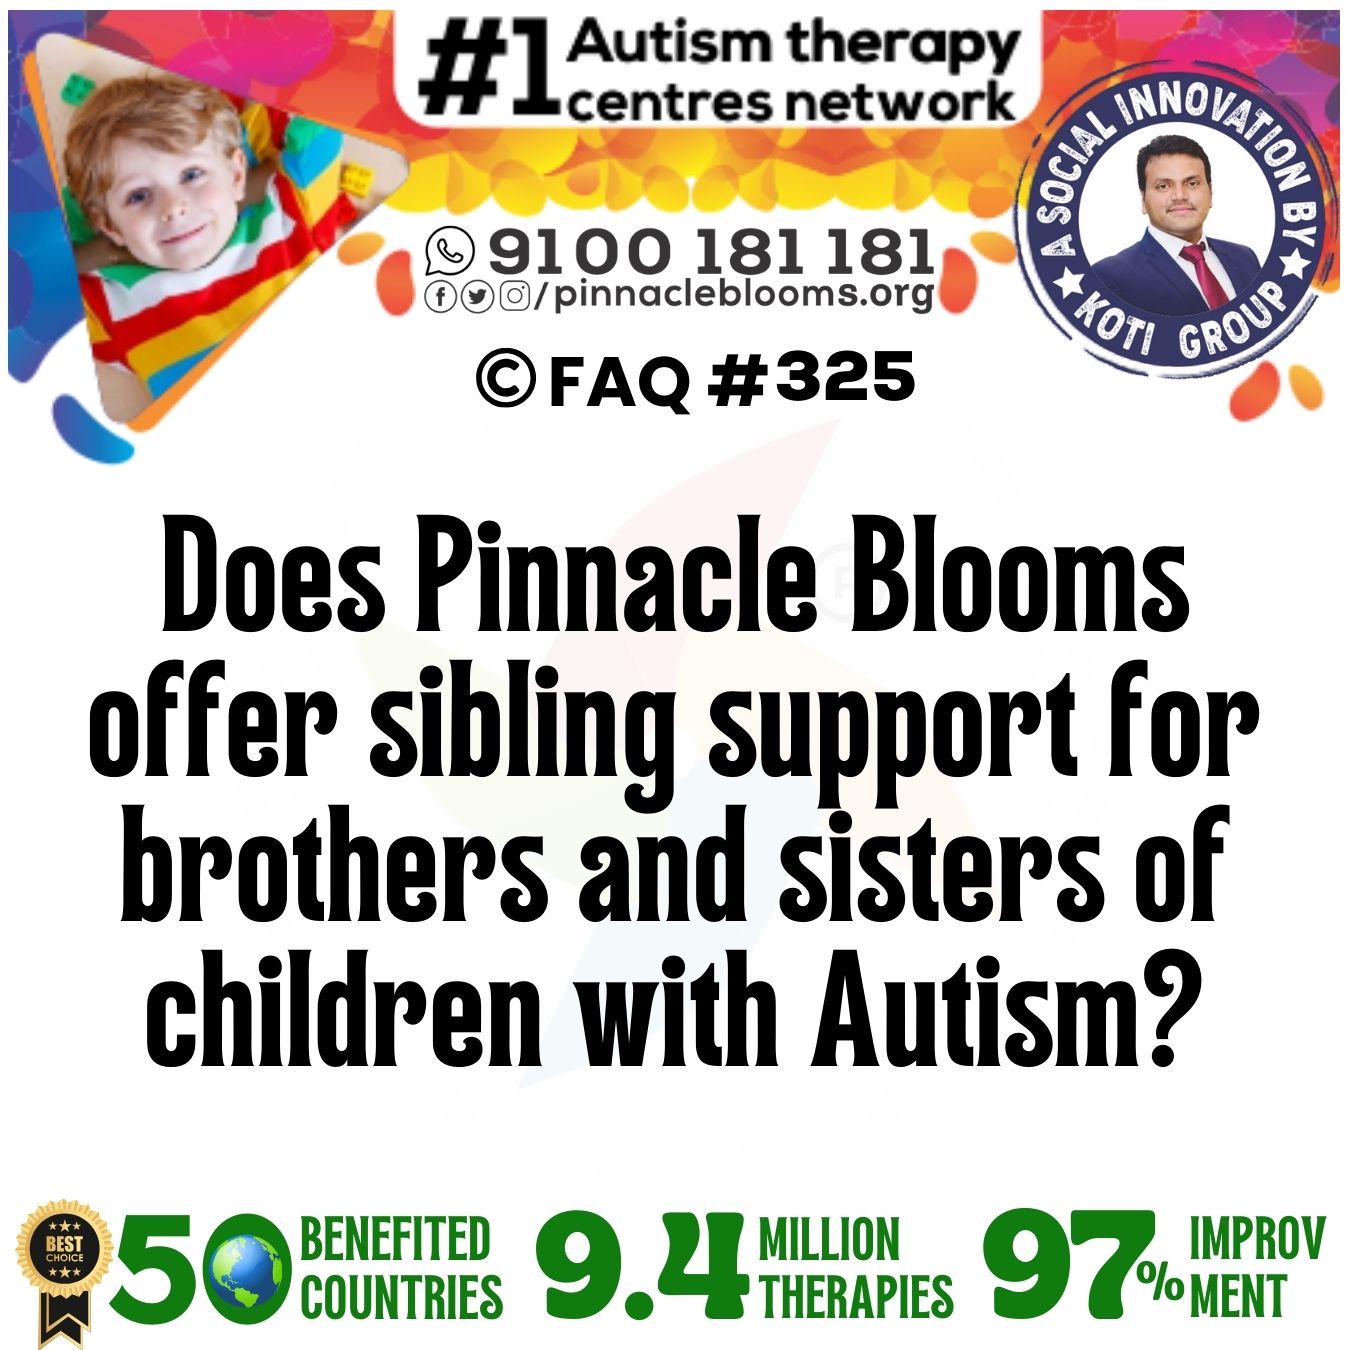 Does Pinnacle Blooms offer sibling support for brothers and sisters of children with Autism?